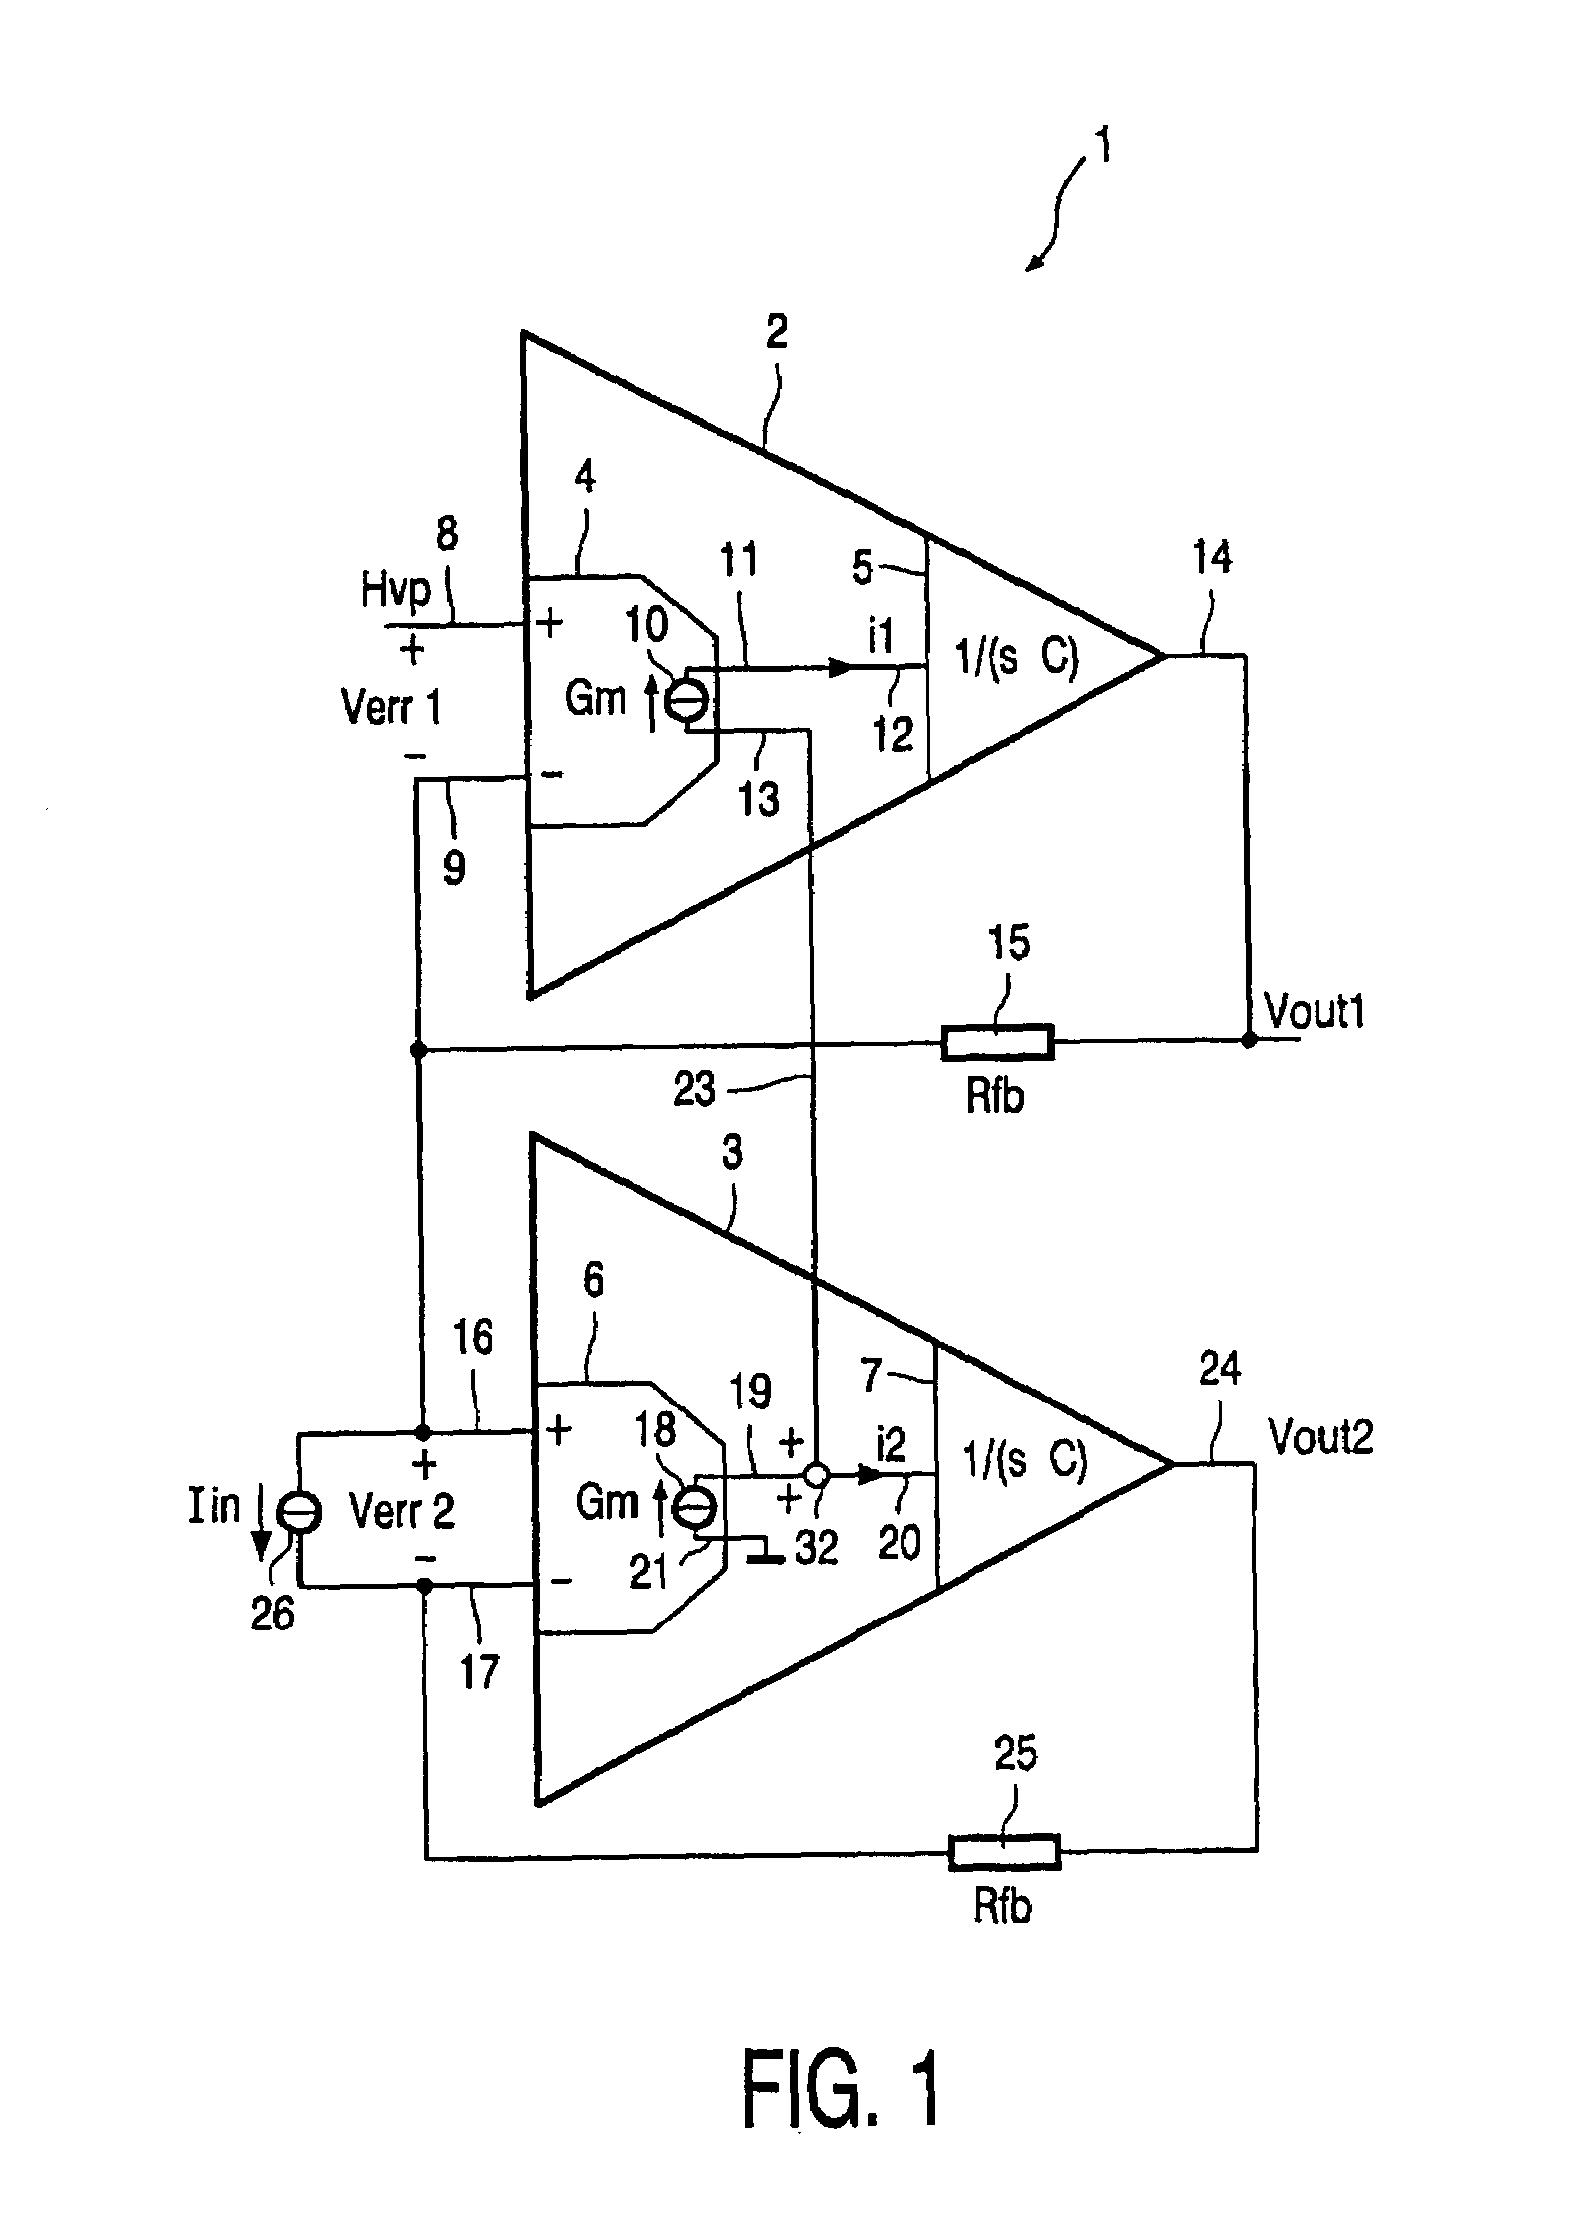 Power amplifier module with distortion compensation